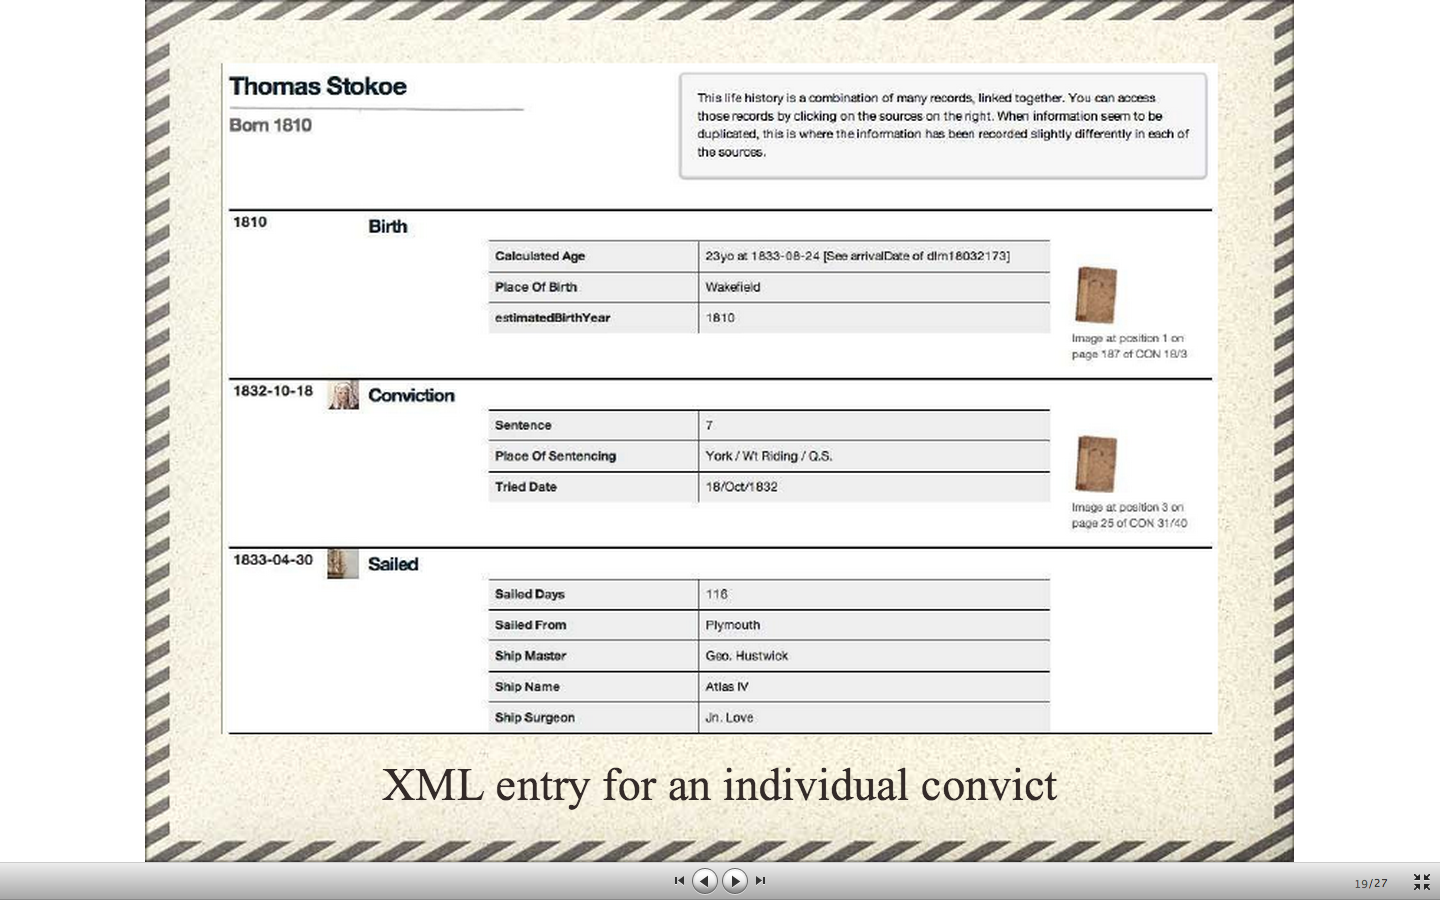 Figure 4.2. Sample Entry for an Individual Convict, Crowdsourced project structure, instructional process and workflow designed by Professor Janet McCalman, Centre for Health & Society, University of Melbourne, with technical assistance from Sandra Silcot and Claudine Chionh. Funded by the Australian Research Council.